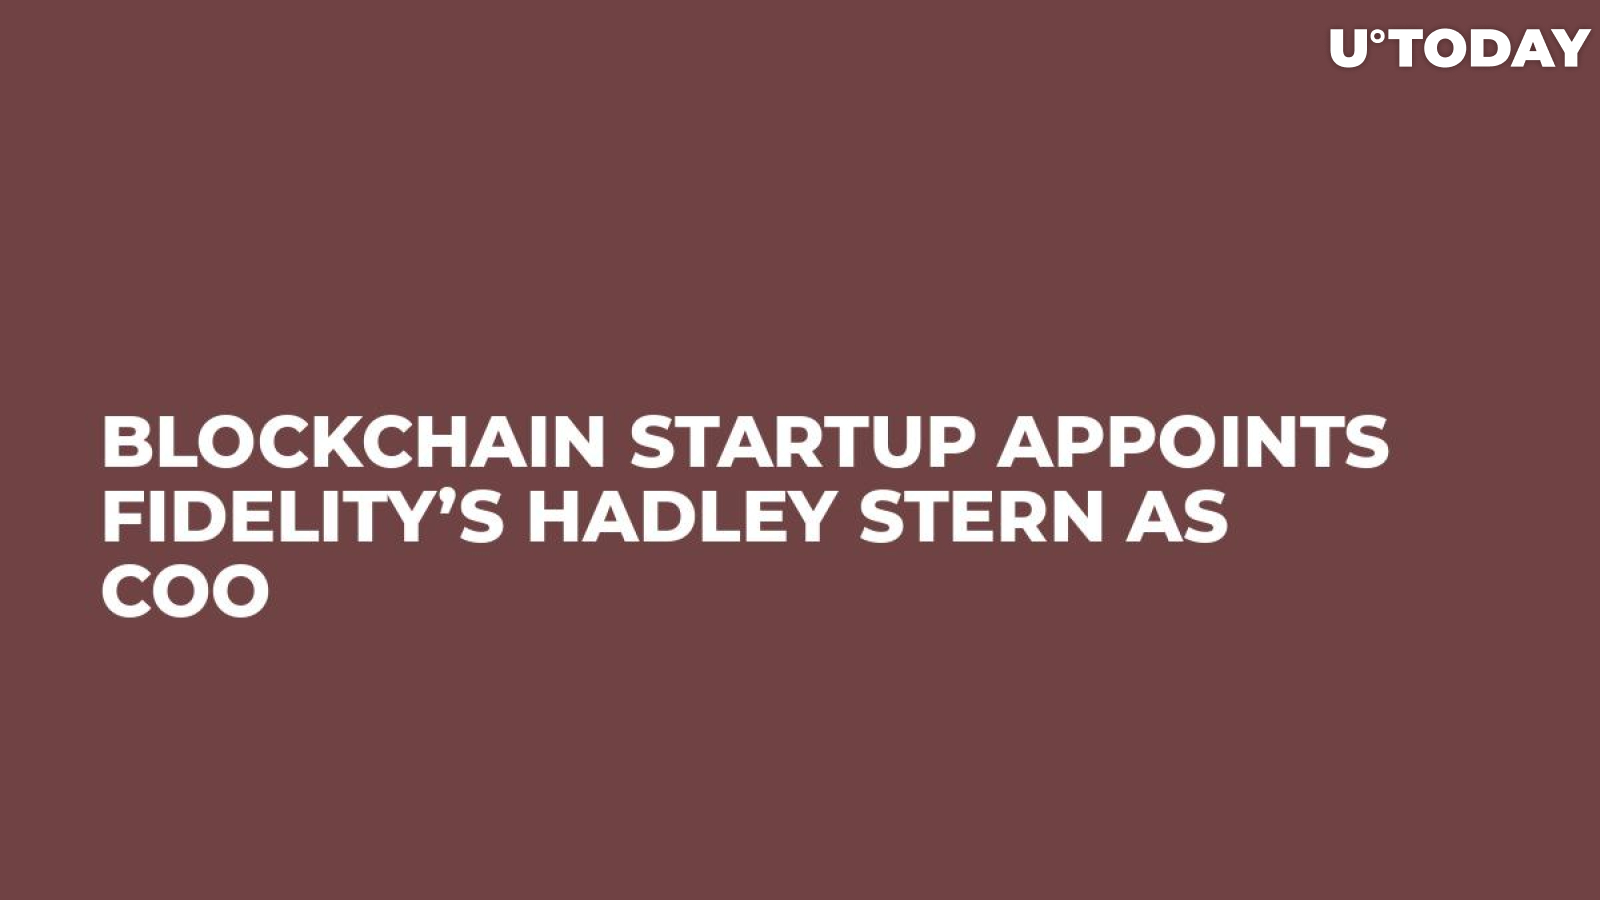 Blockchain Startup Appoints Fidelity’s Hadley Stern as COO